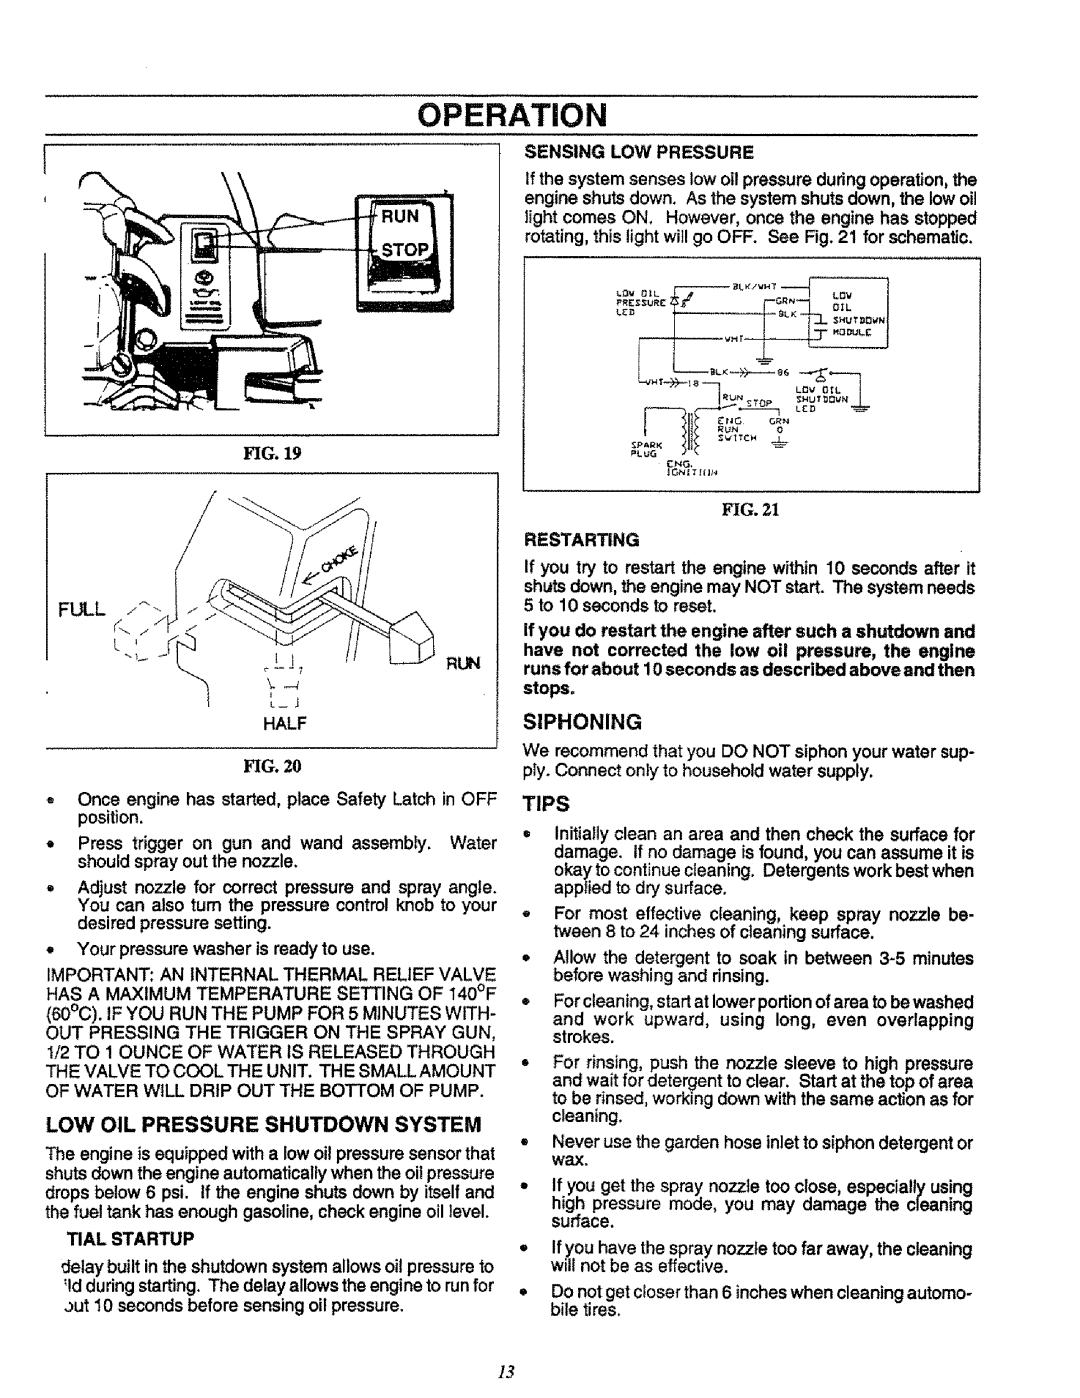 Craftsman 580.751651 owner manual Full, Low Oil Pressure Shutdown System, Siphoning, Tips, Operation, Fig 